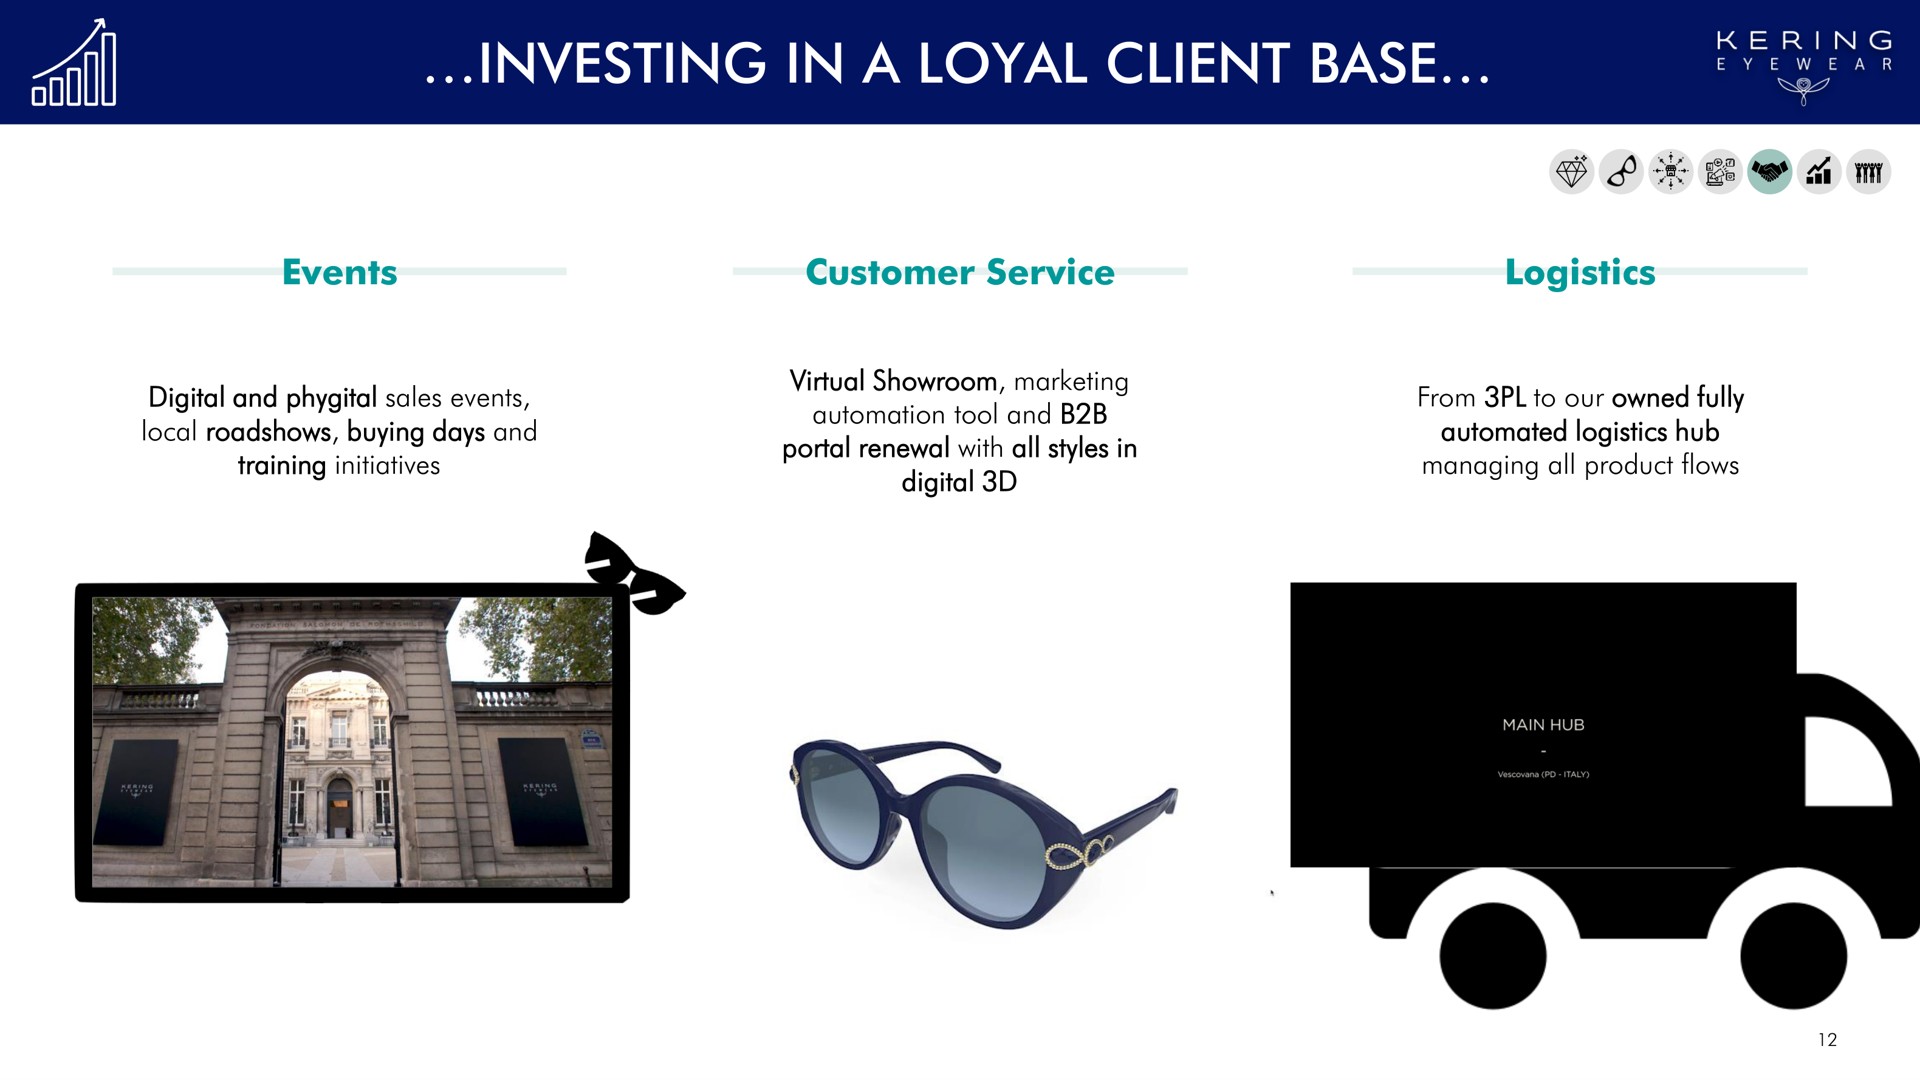 investing in a loyal client base eas | Kering